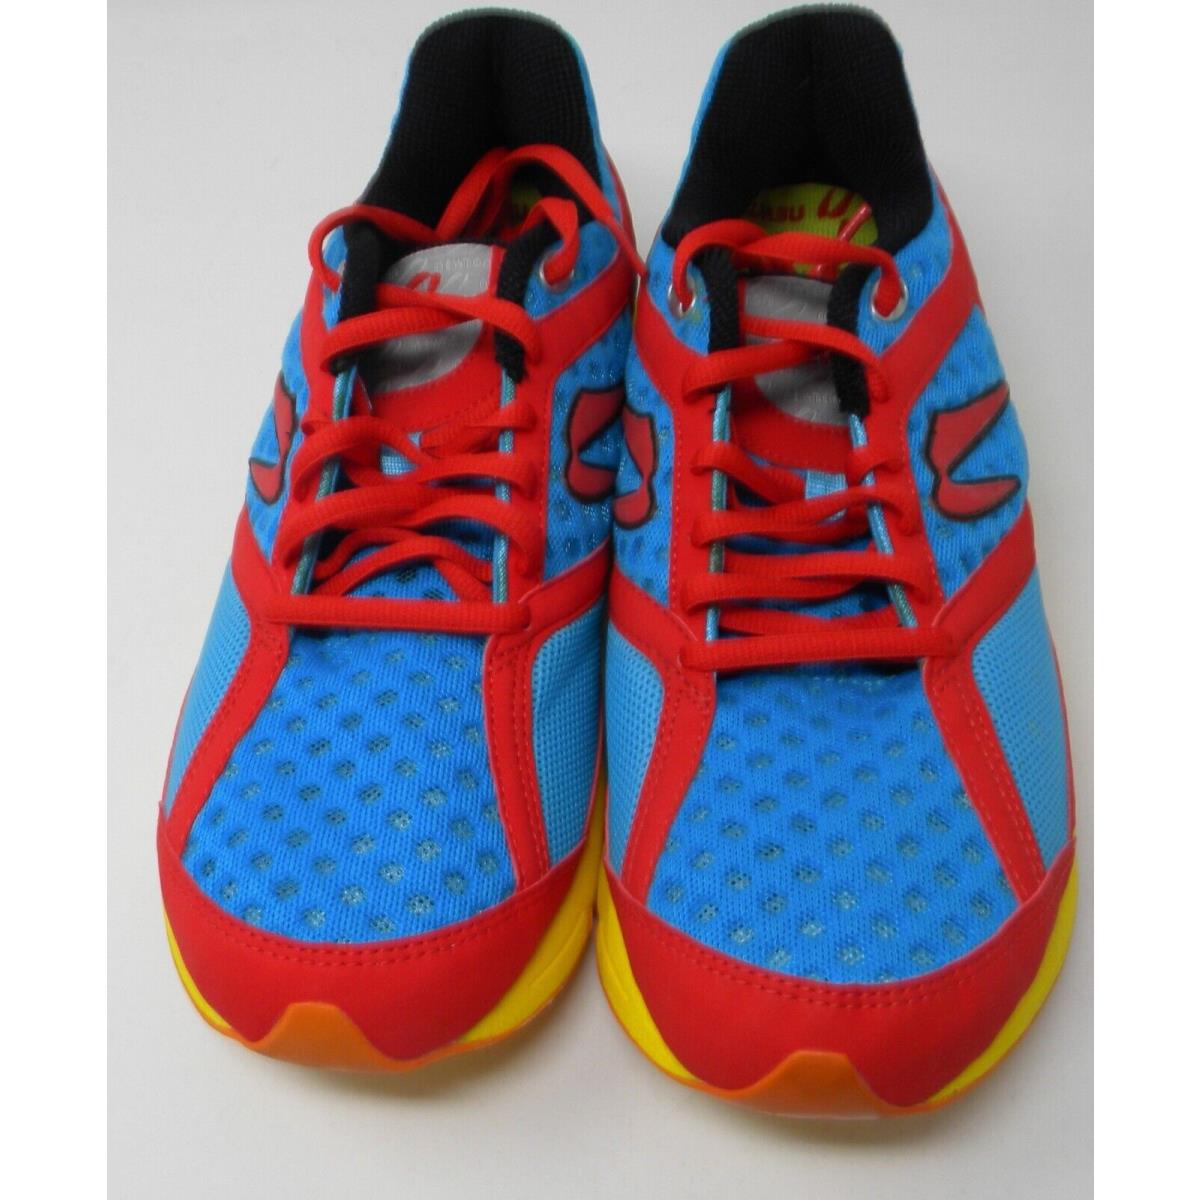 Mens Newton Gravity Size 9 Neutral Running Shoes